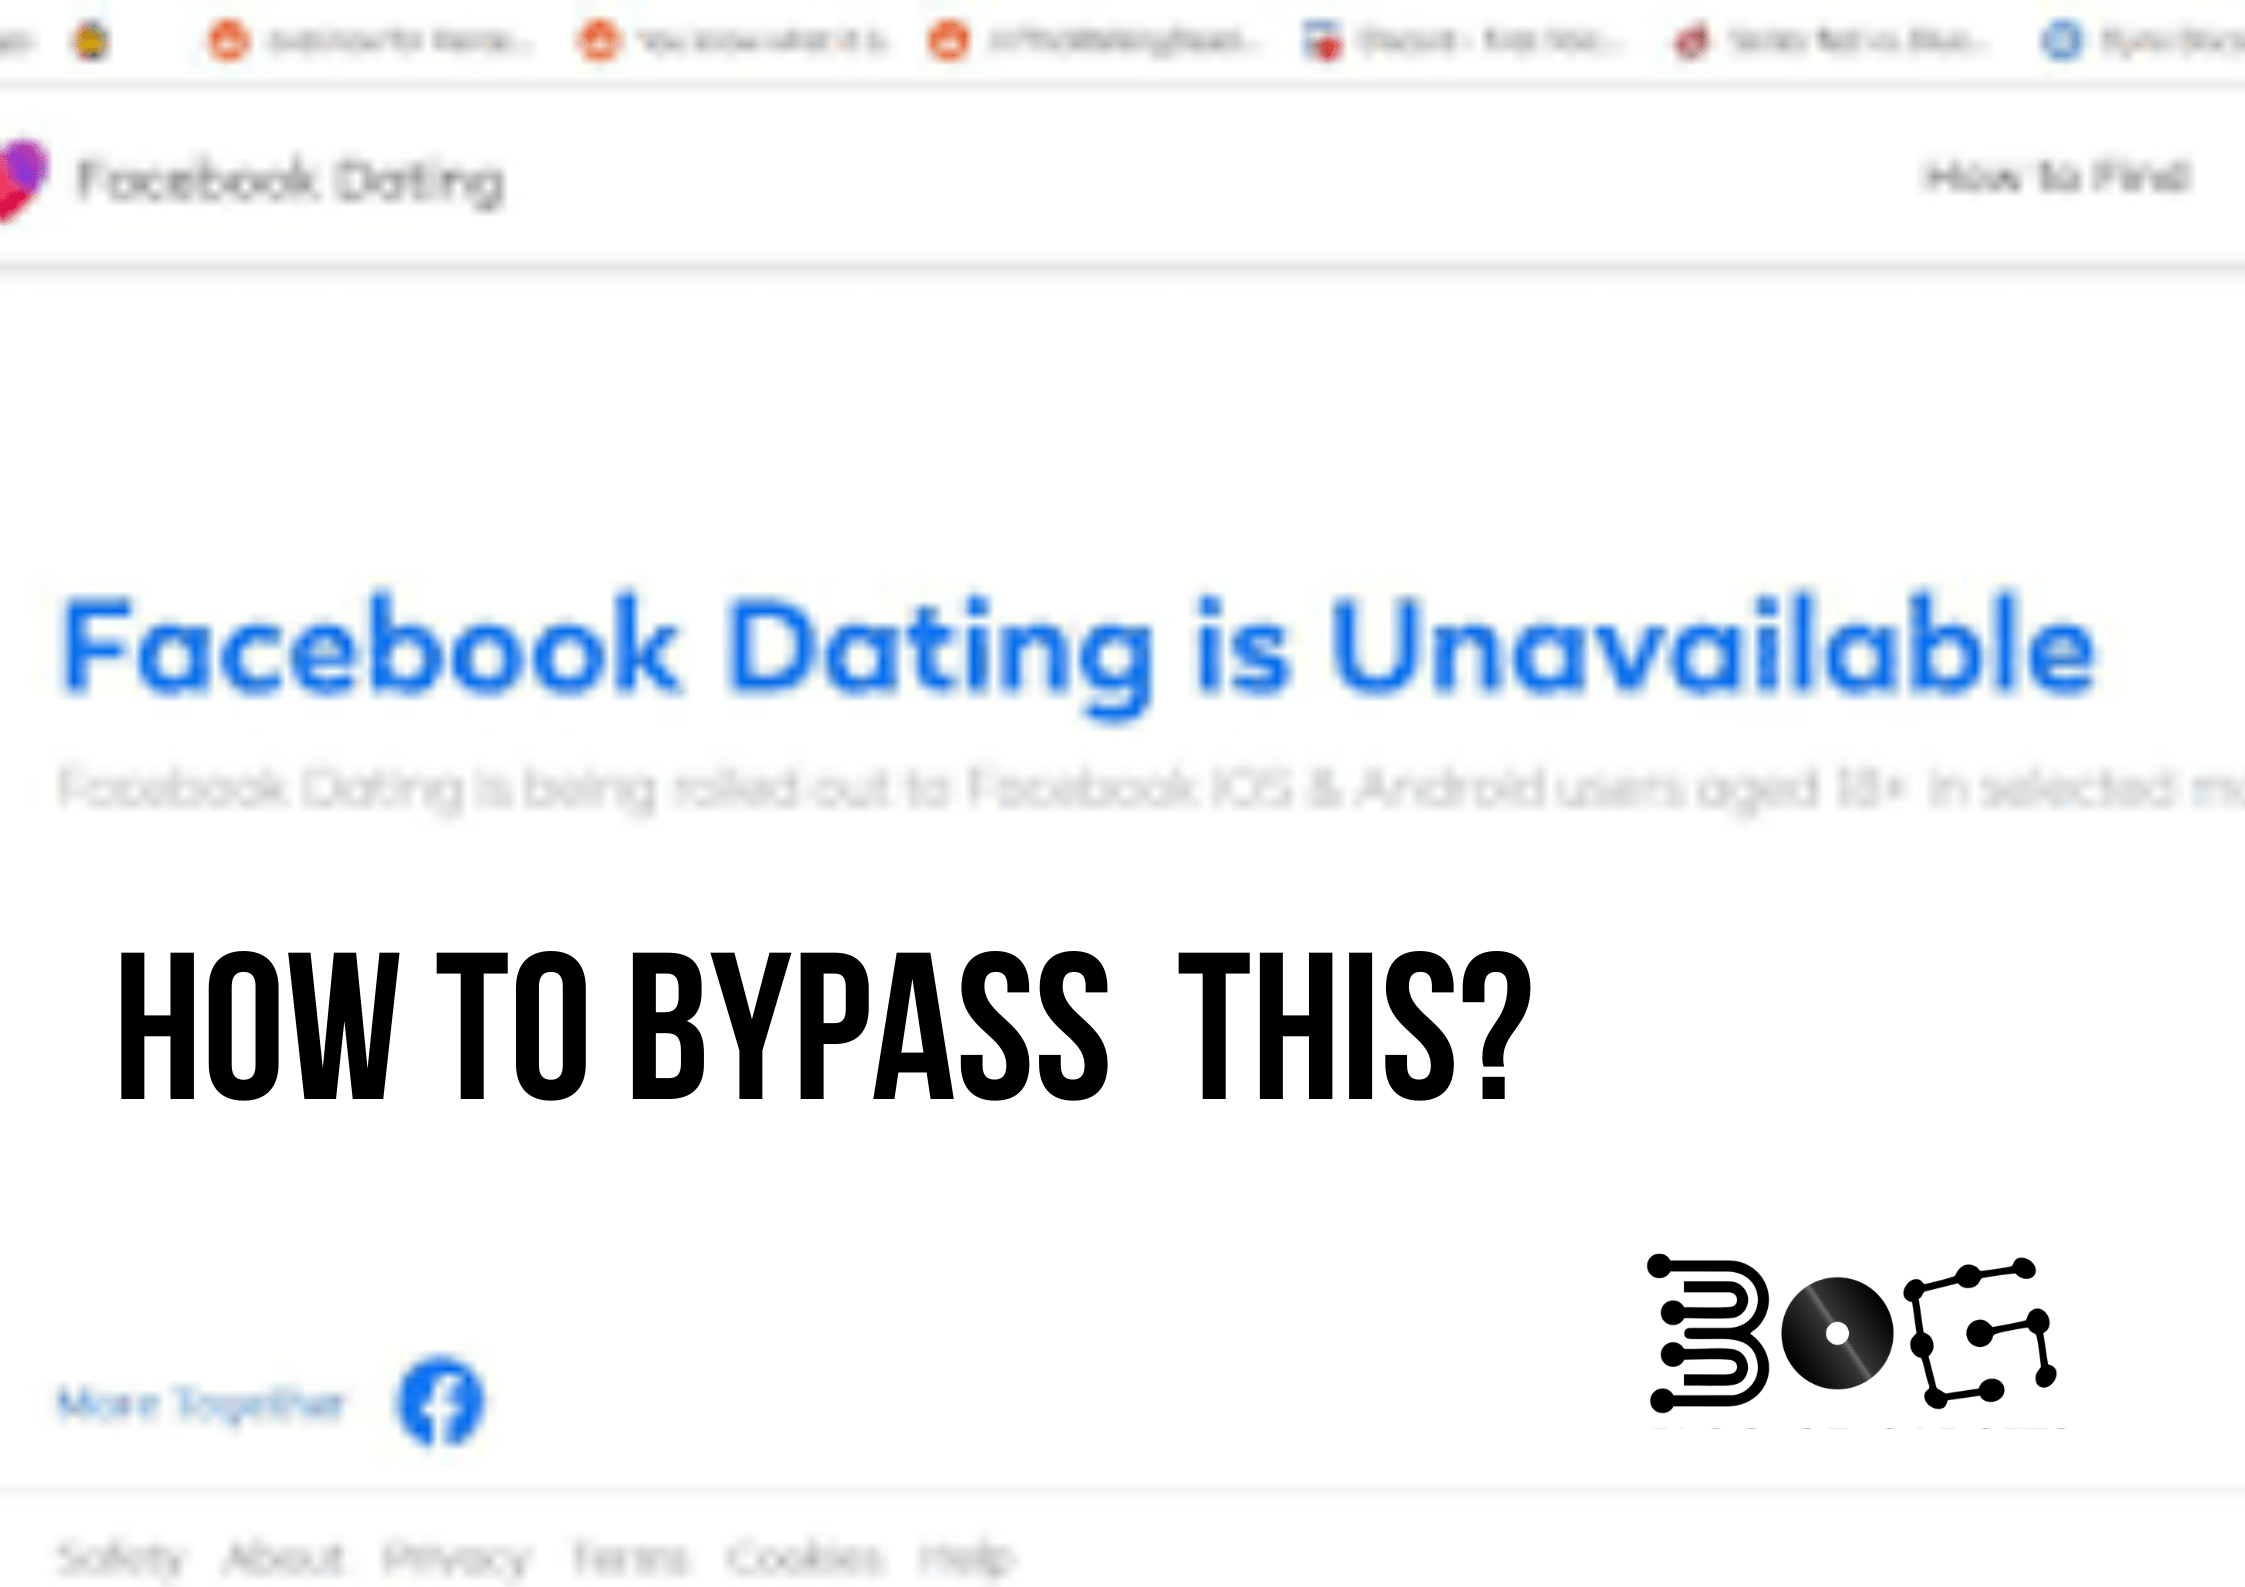 facebook dating is unavailable